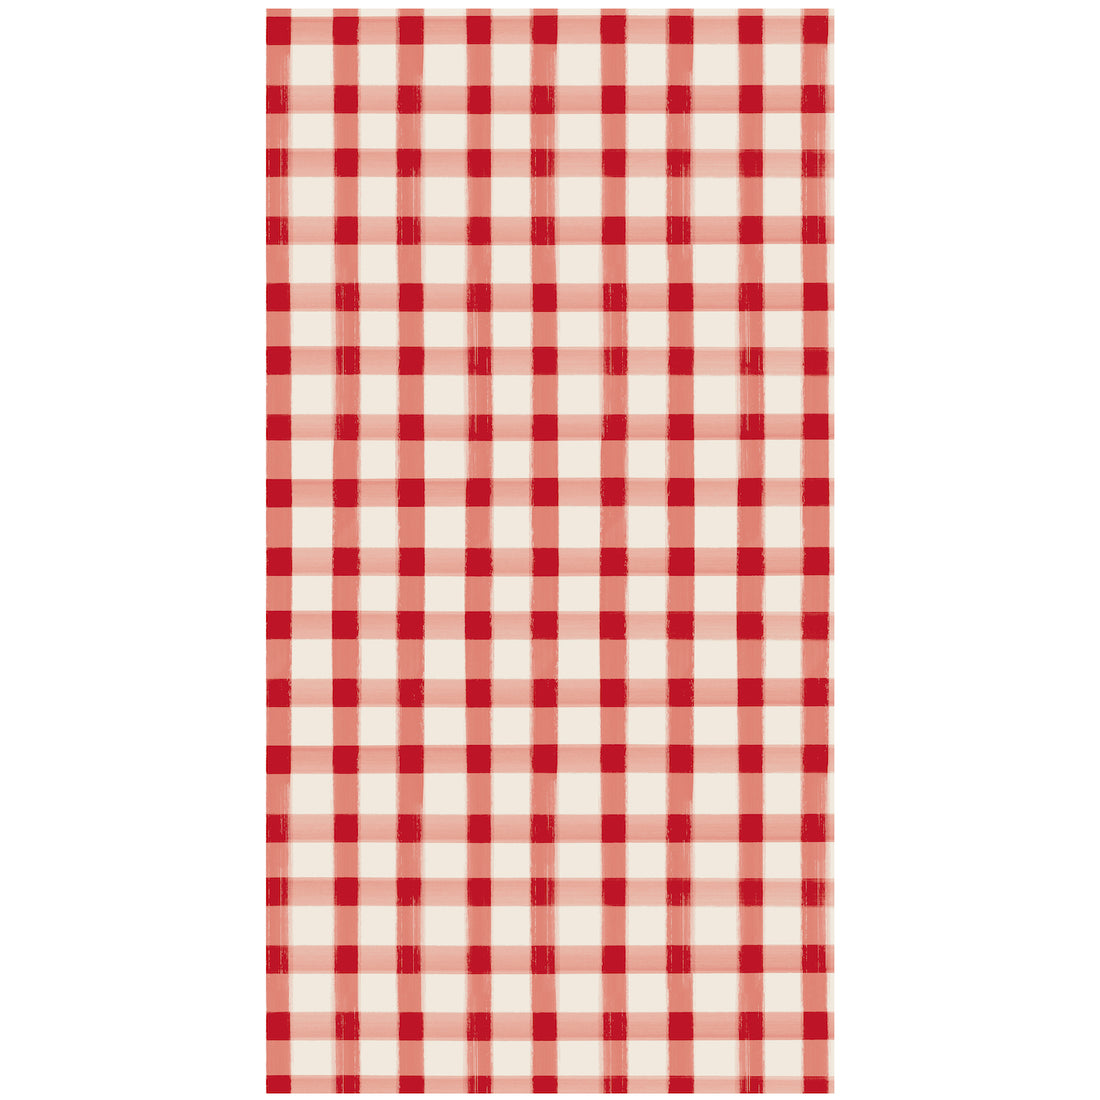 A rectangle guest napkin featuring painted gingham grid check pattern made of light red lines intersecting at red squares, on a white background.